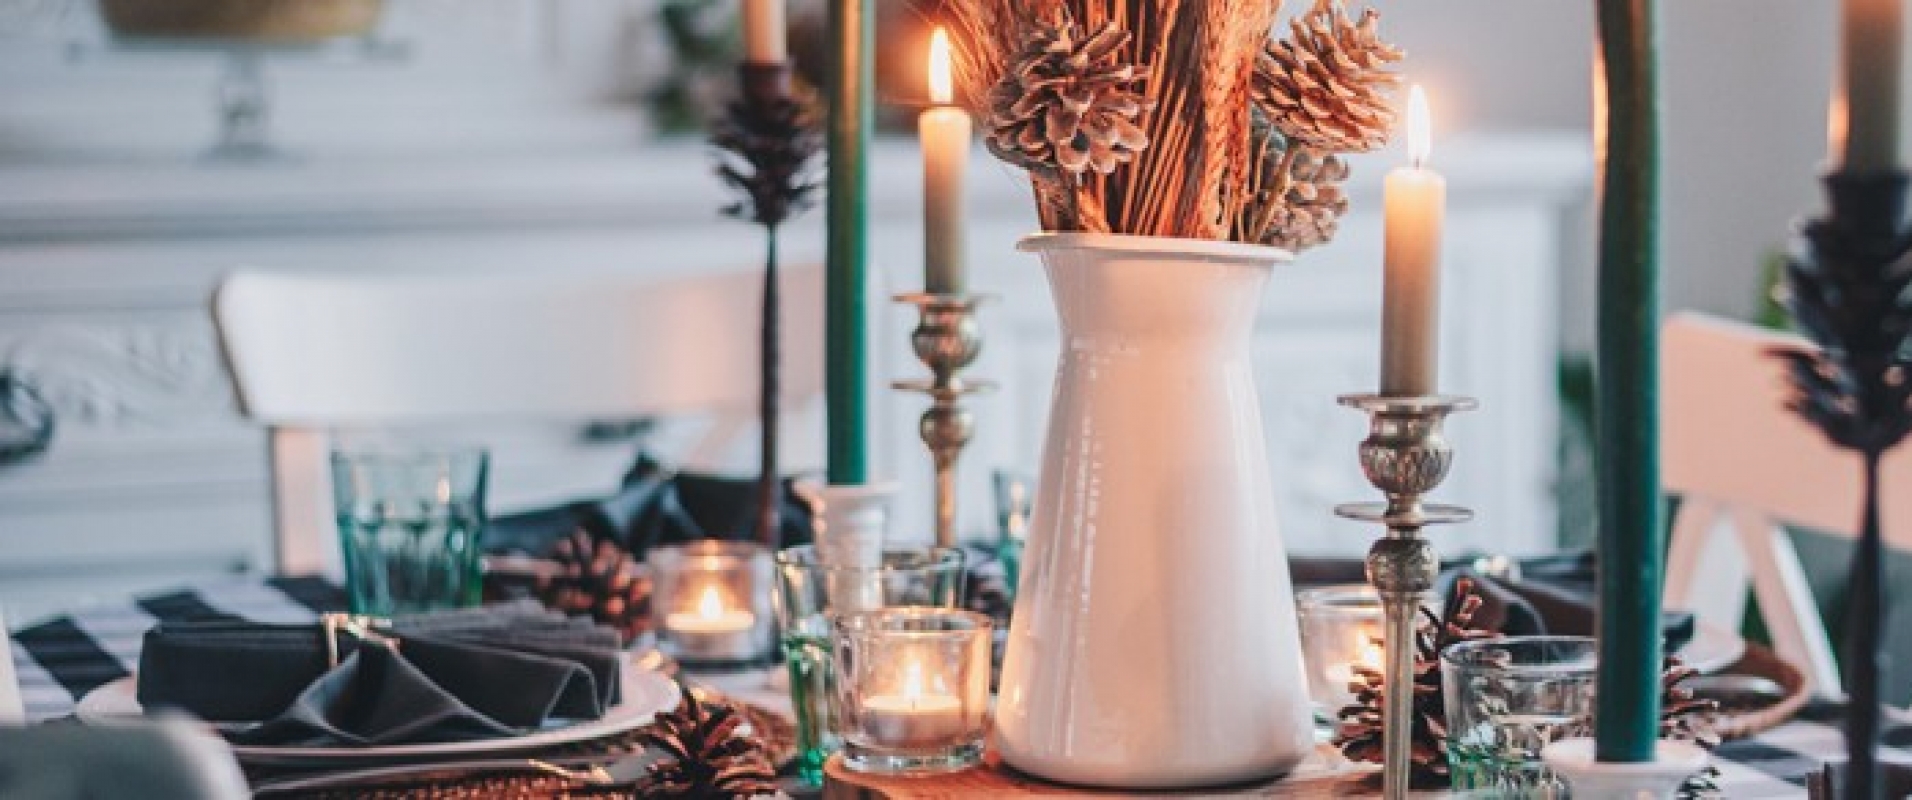 How to set up a beautiful Christmas table?